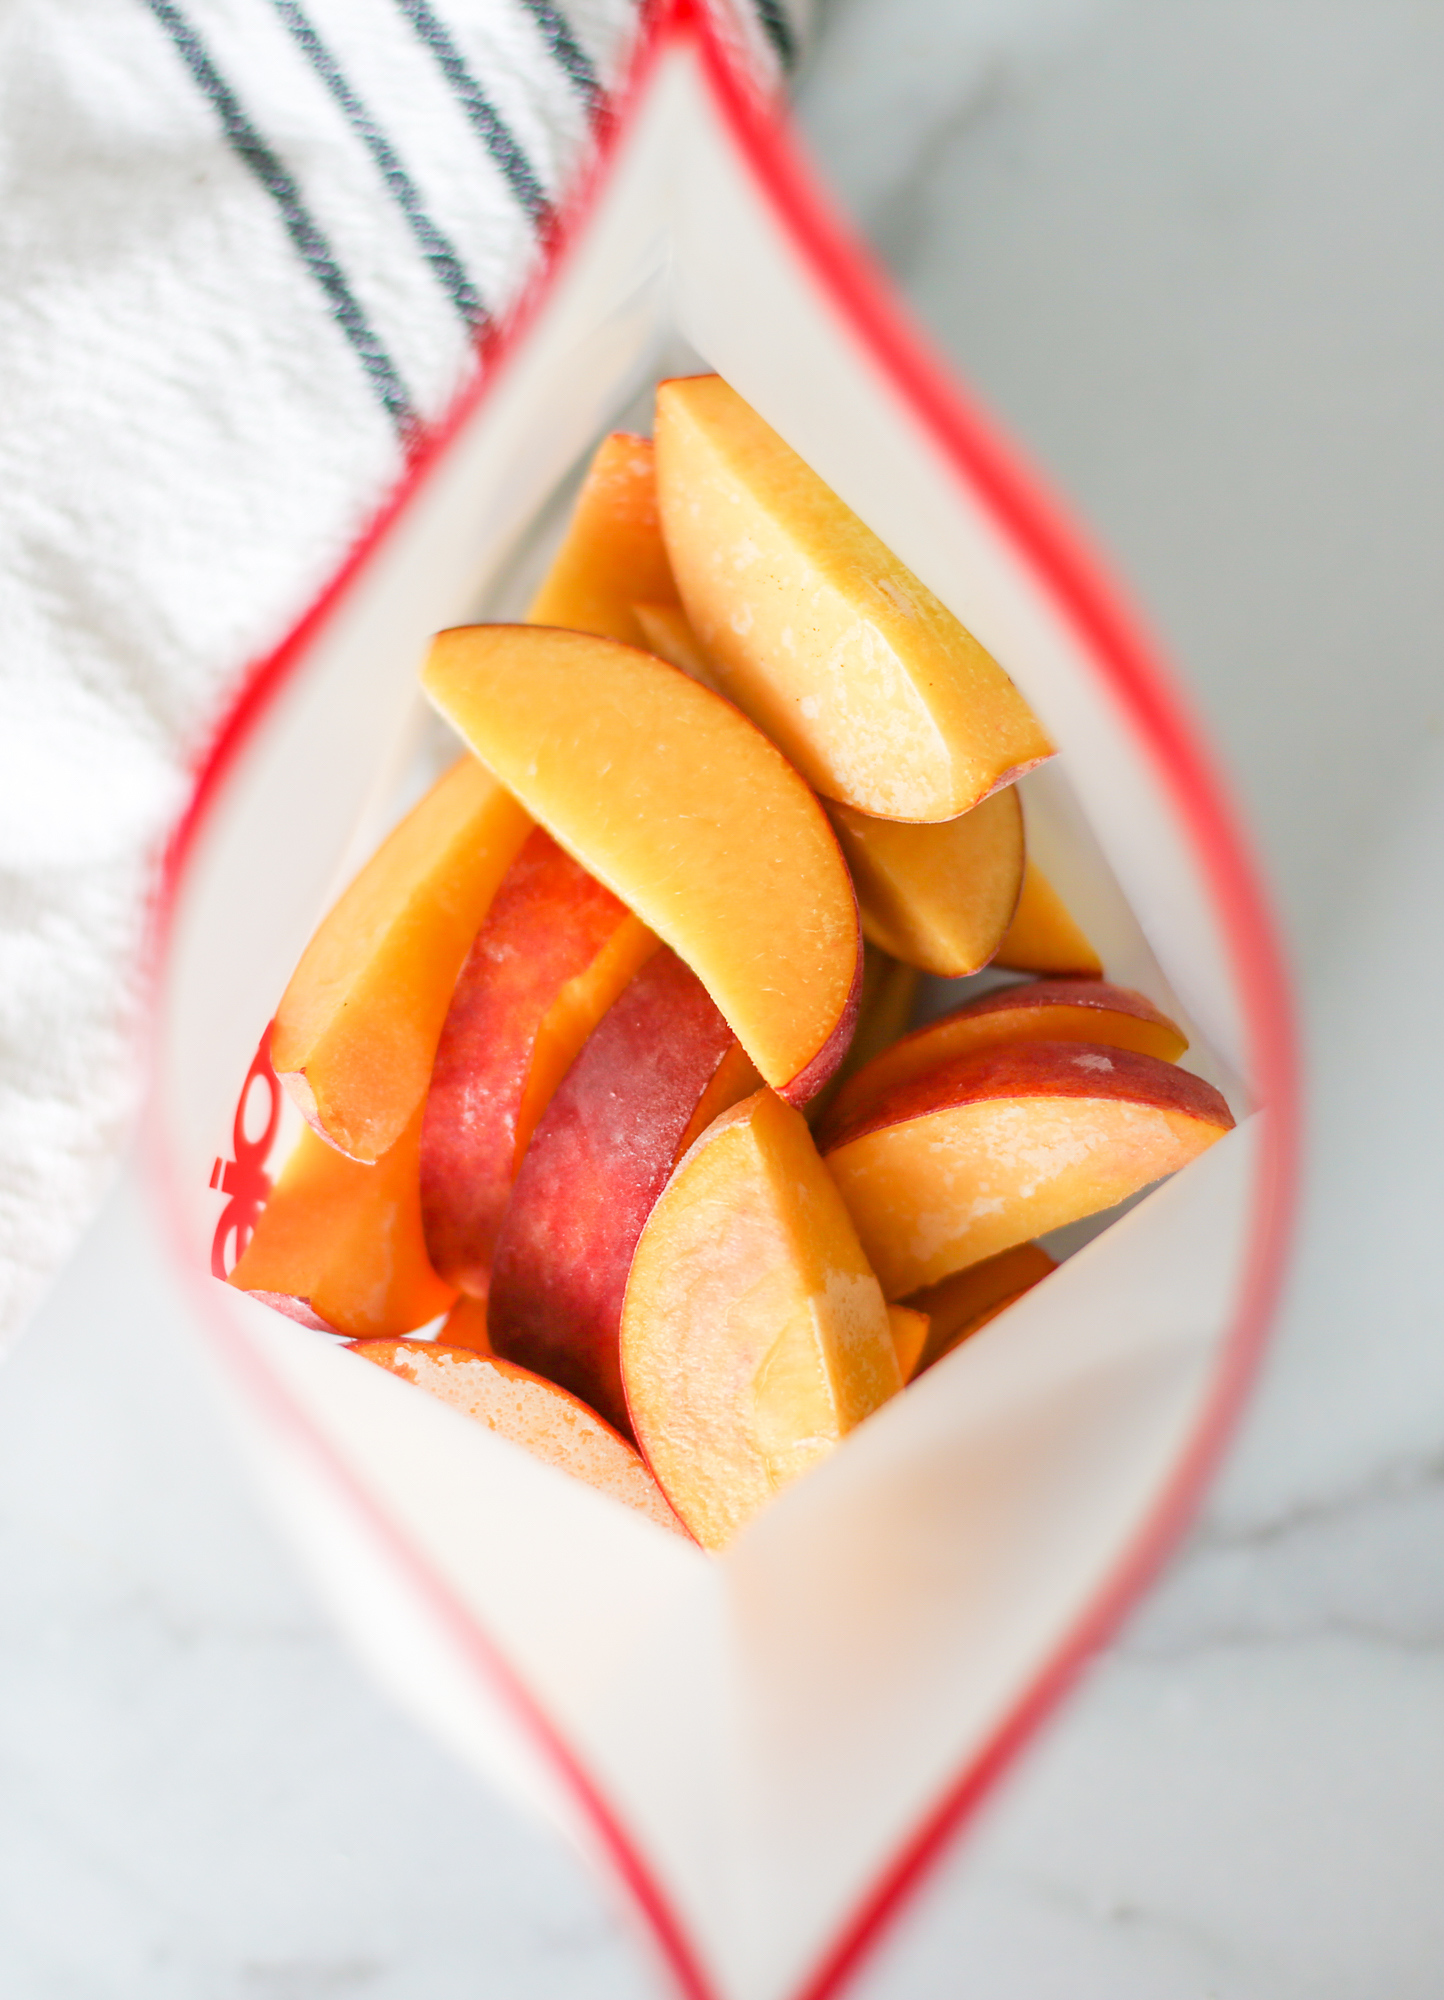 Peach slices that have been flash frozen in an open reusable freezer bag.